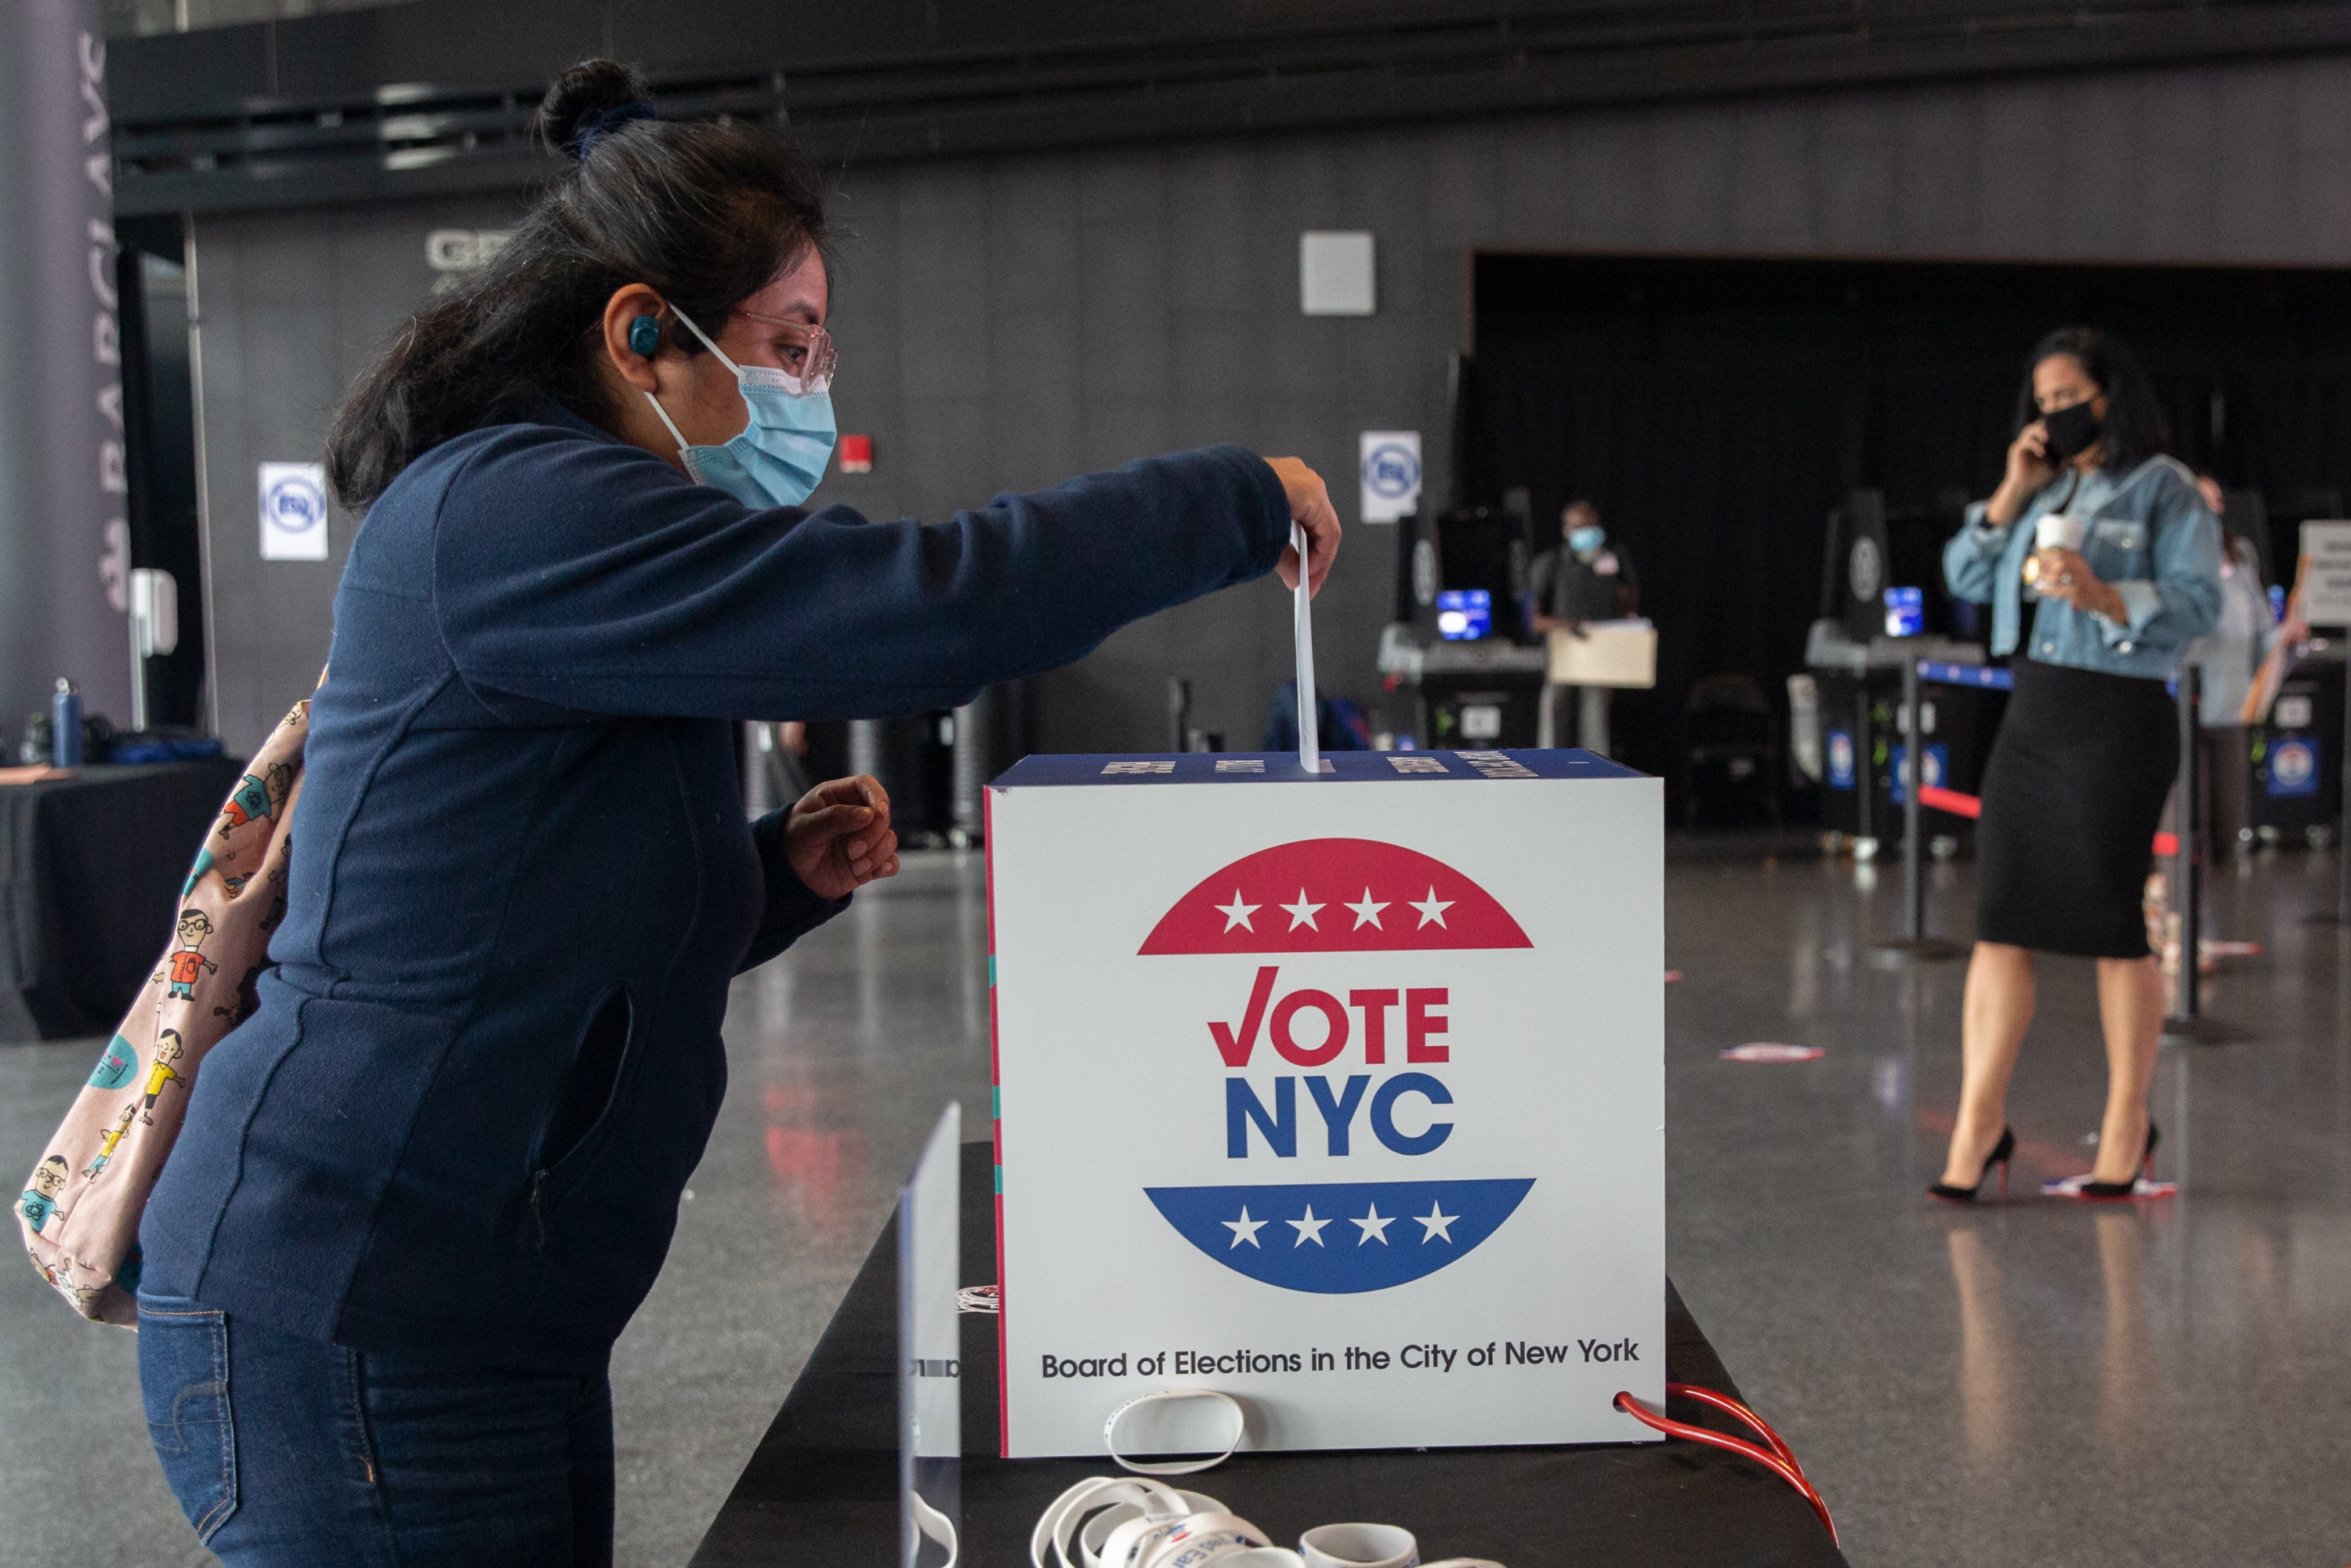 A Brooklynite drops off an ballot at the Barclays Center on the first day of early voting, Oct. 24, 2020.